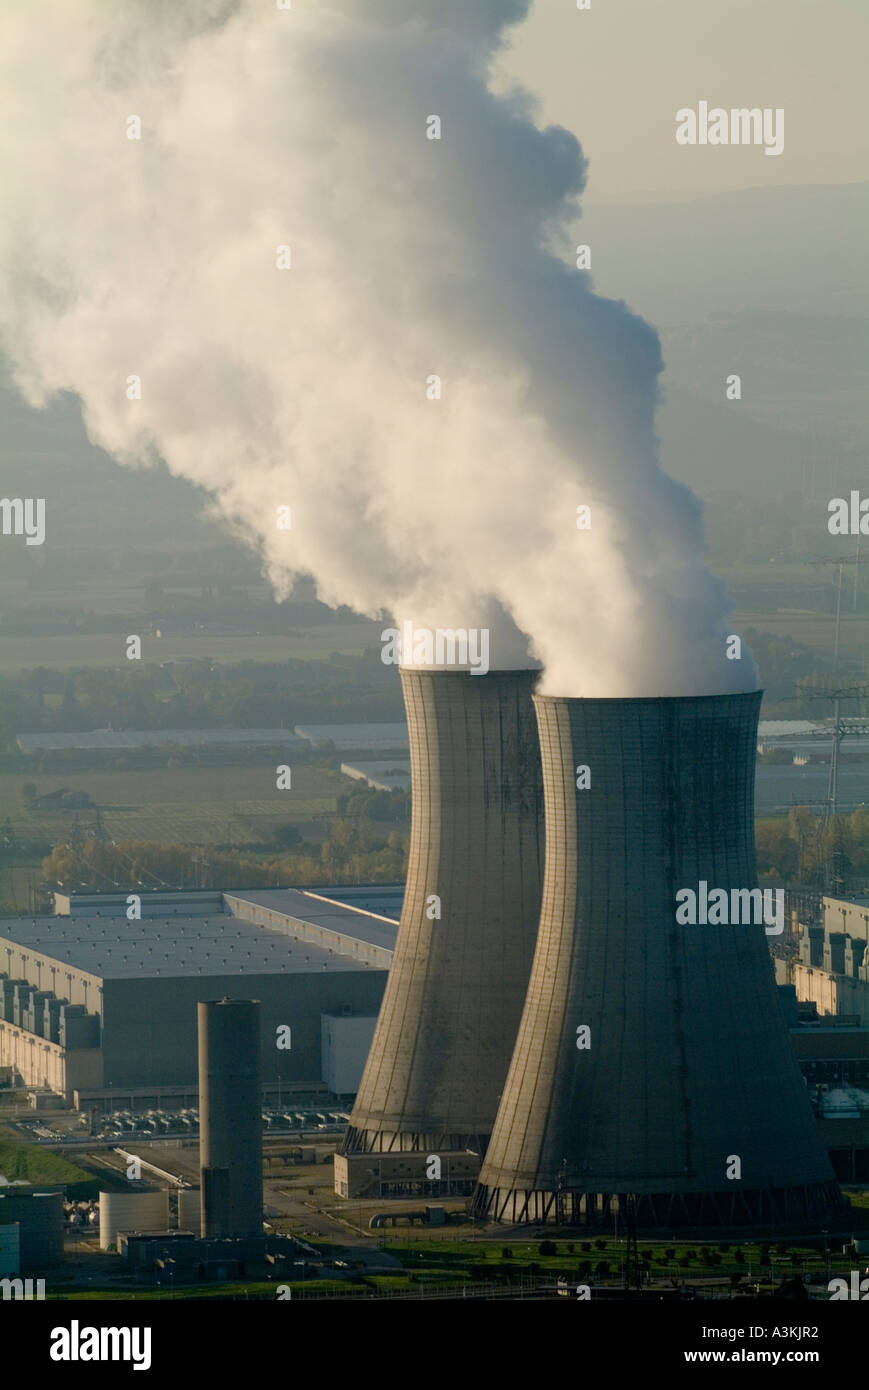 Smoke emitting from cooling towers at a nuclear power plant in the Rhone River Valley, Drome, France. Stock Photo